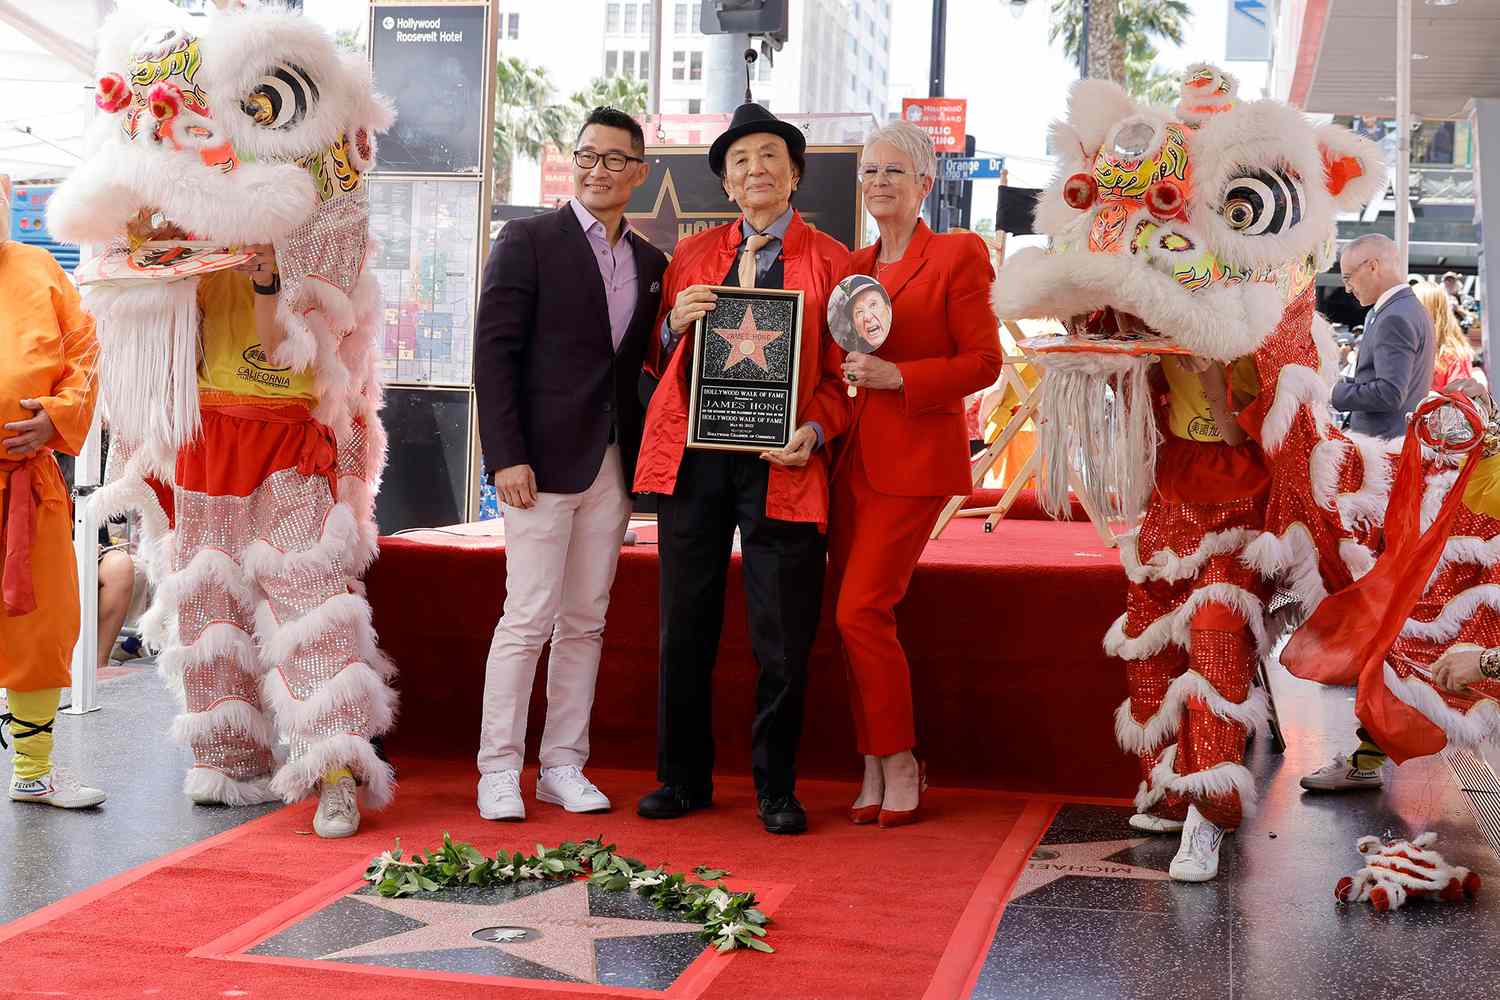 Daniel Dae Kim, James Hong and Jamie Lee Curtis attend the Hollywood Walk of Fame Star Ceremony for James Hong on May 10, 2022 in Hollywood, California.